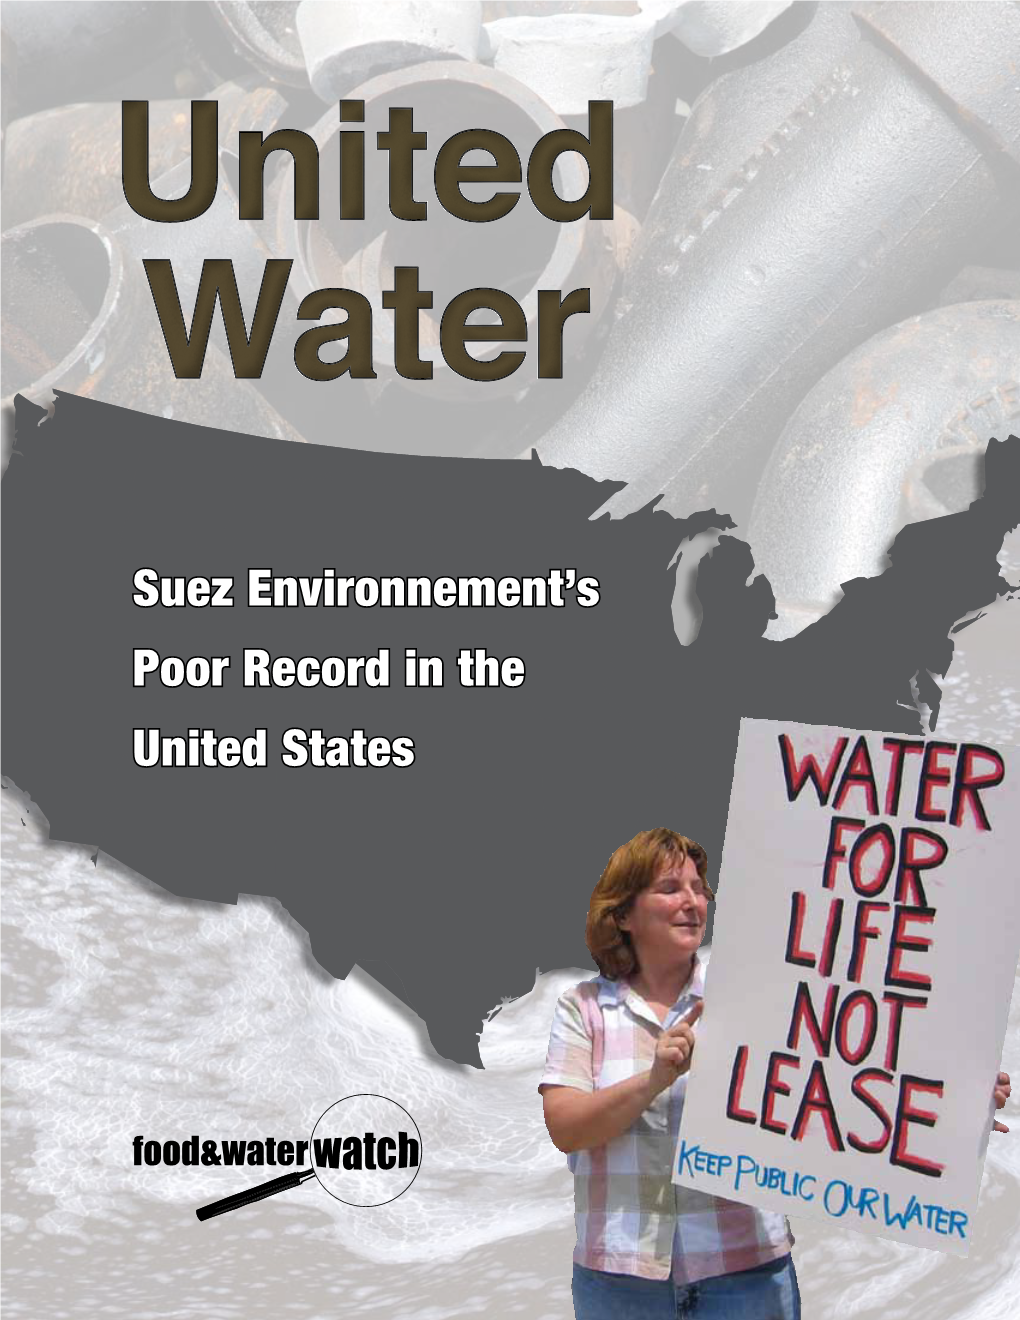 Suez Environnement's Poor Record in the United States